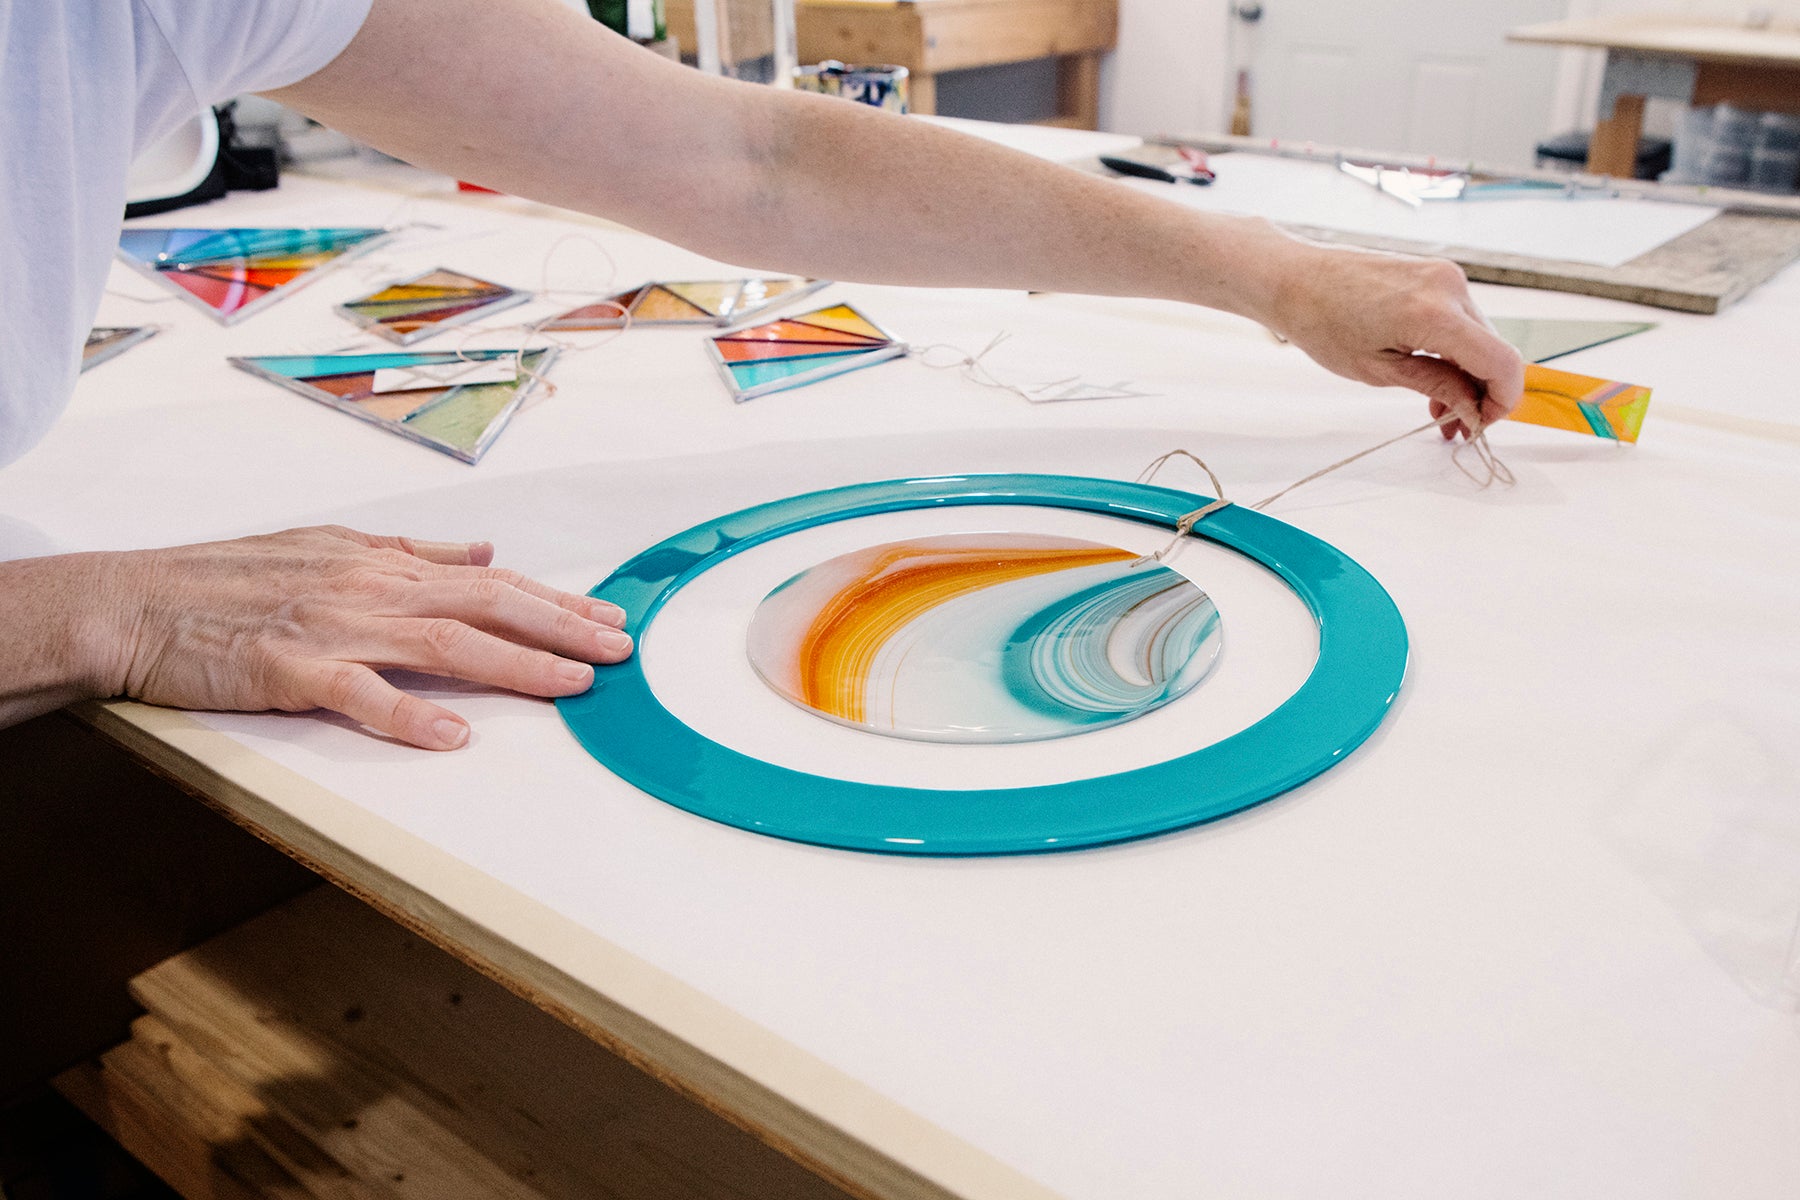 Detail photograph of Debbie Bean laying down a round, pale blue piece of stained glass with a string on top, in her studio.